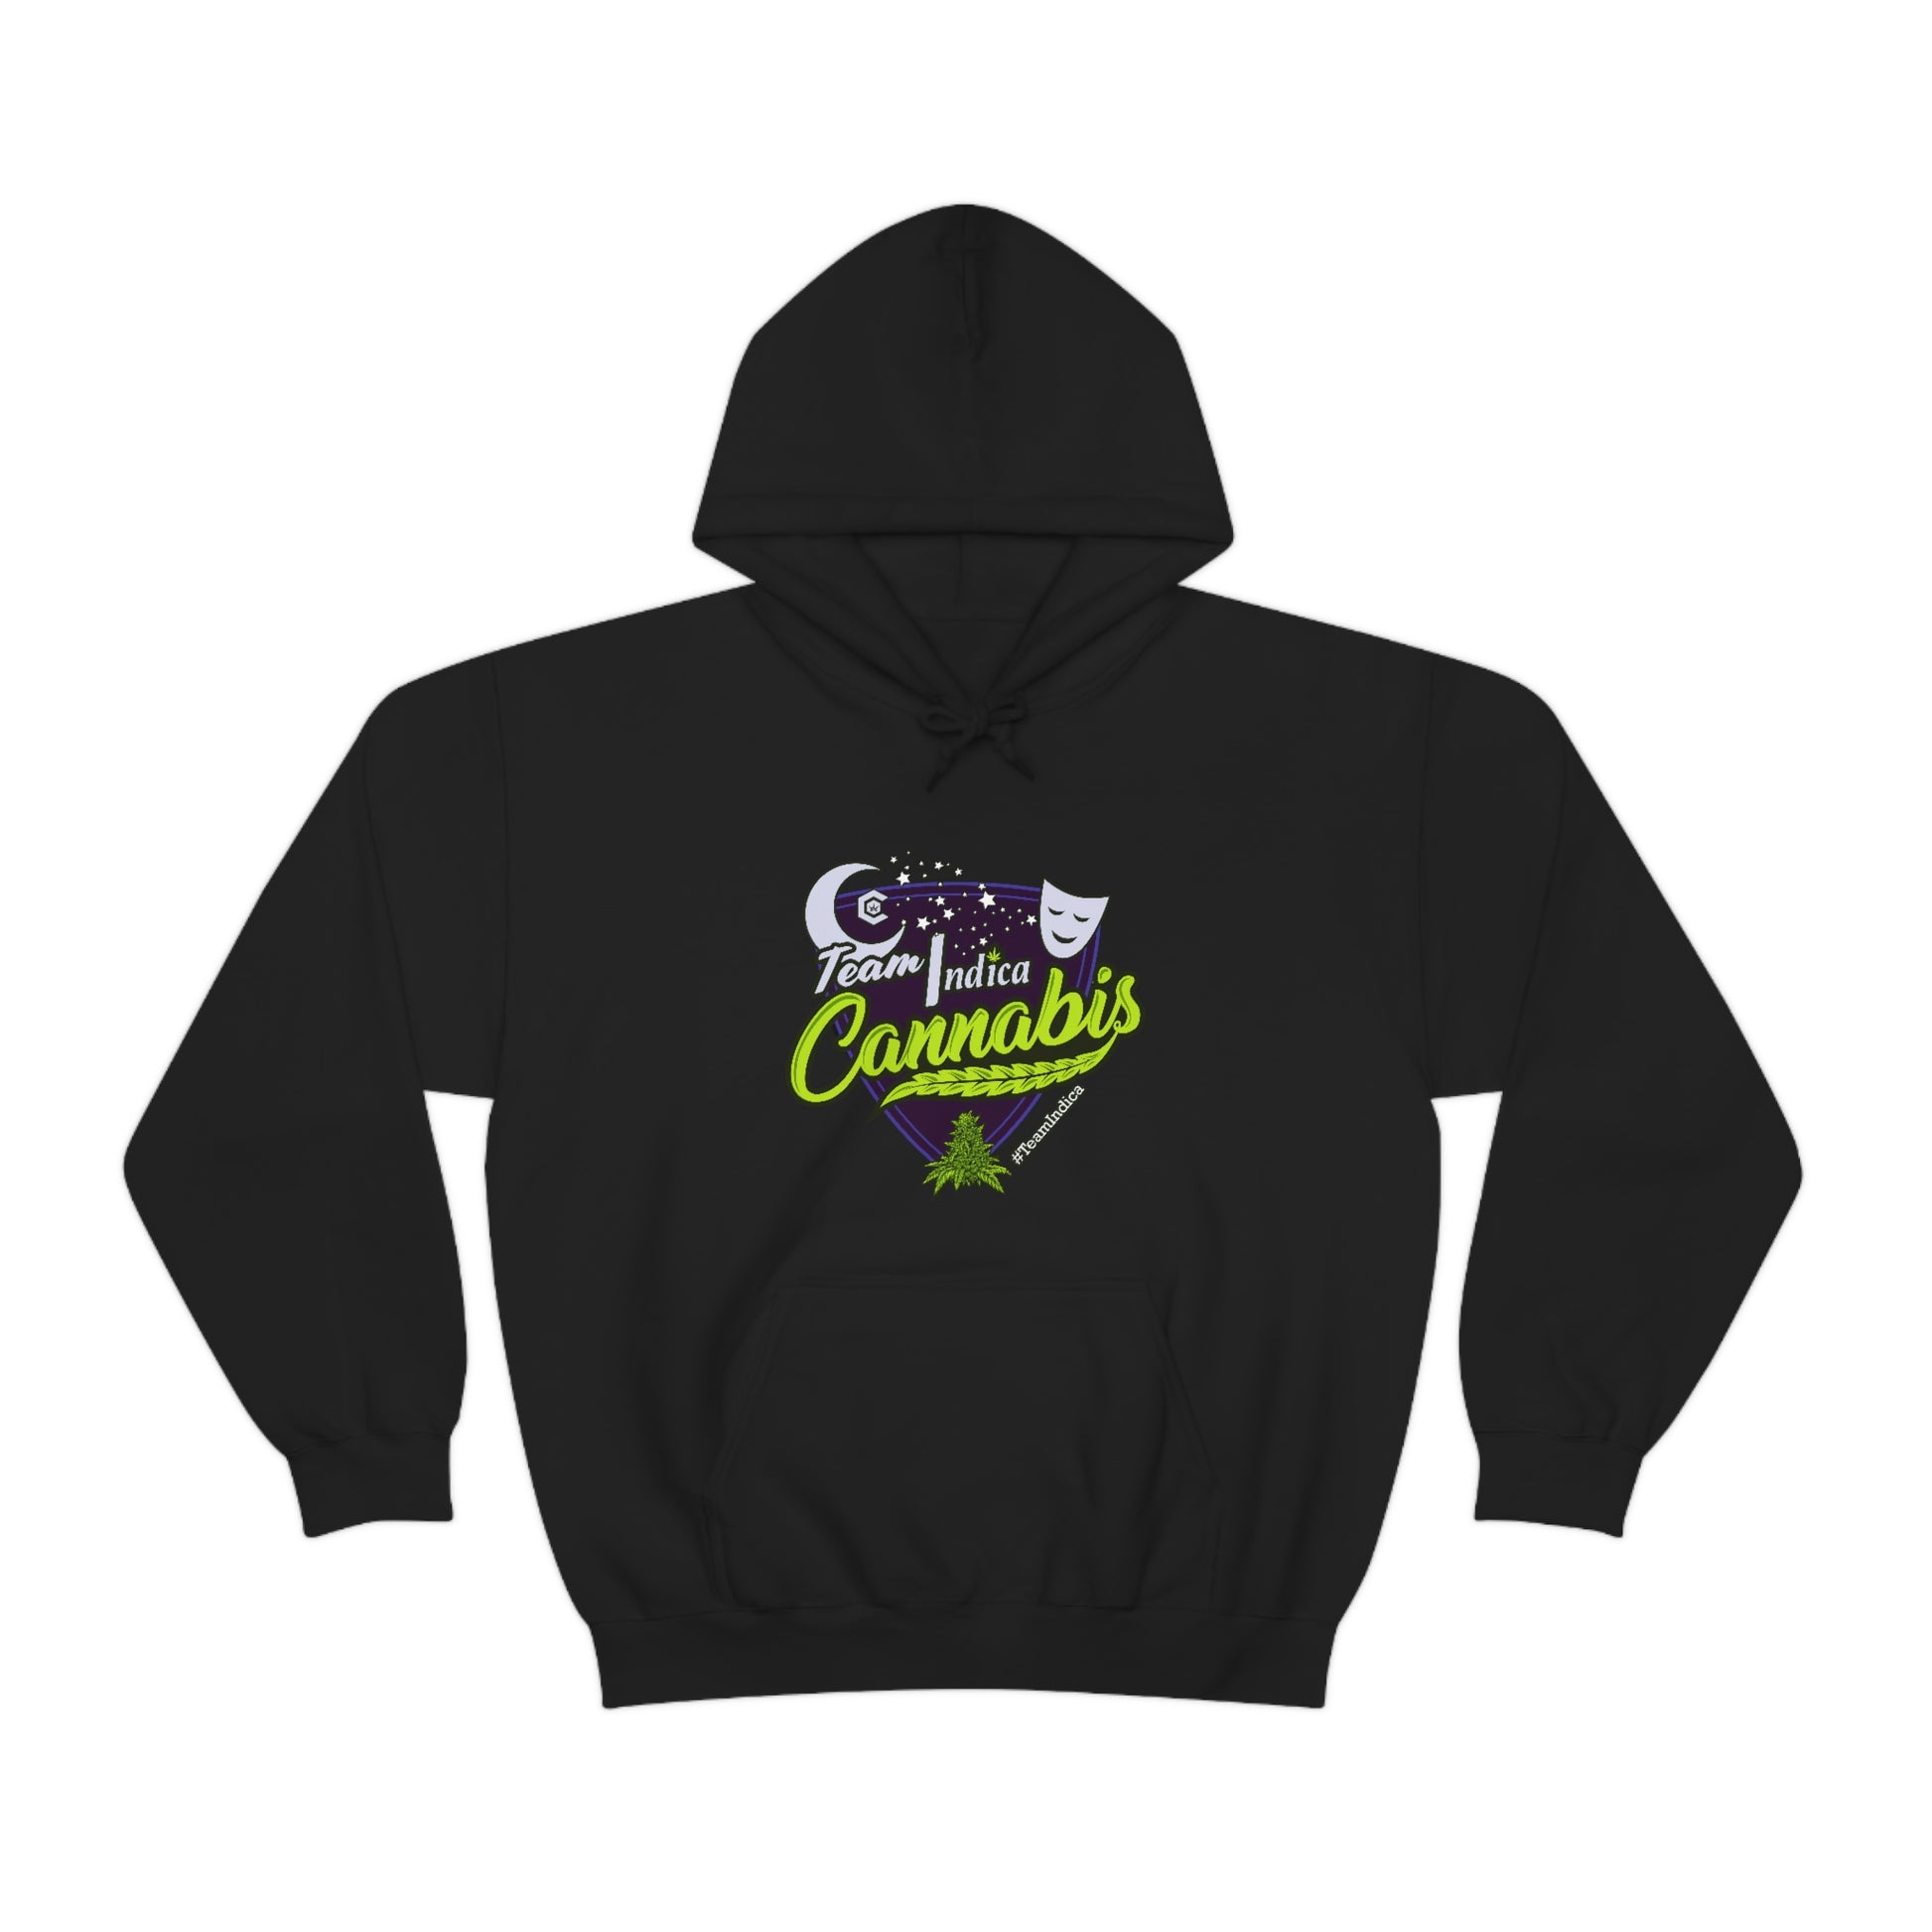 a black hooded sweatshirt with the product name "Team Indica Cannabis Pullover" on it